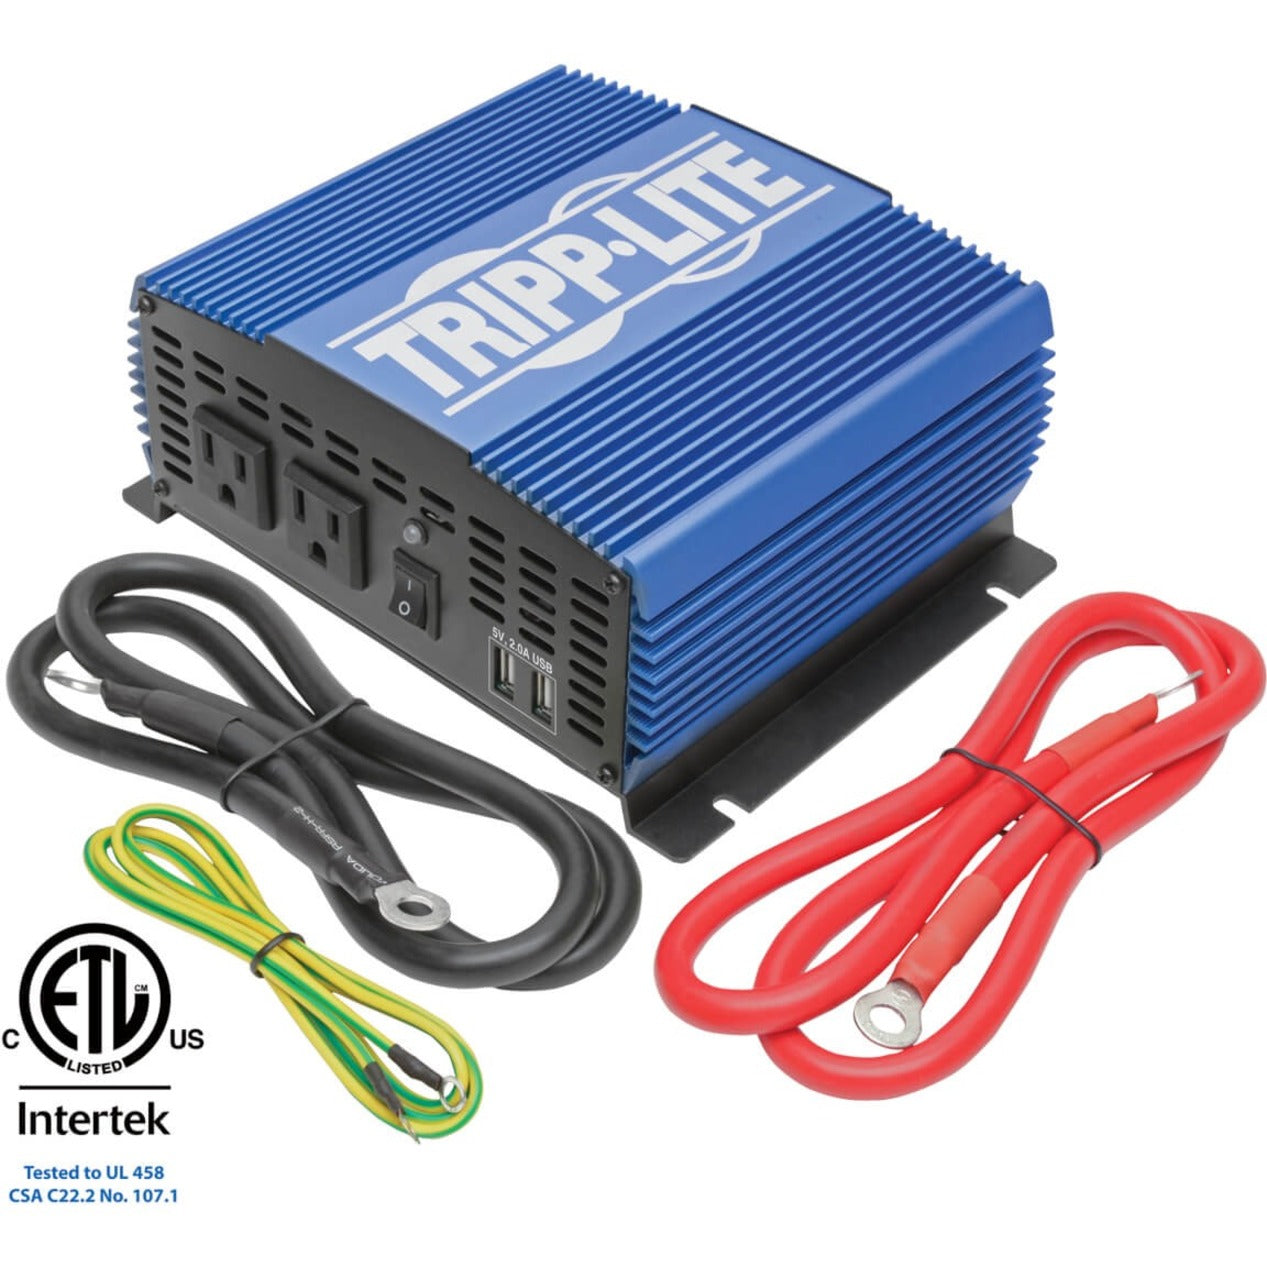 Tripp Lite PINV1500 Power Inverter, 1500W Compact Mobile Portable 2 Outlet 2 USB Port